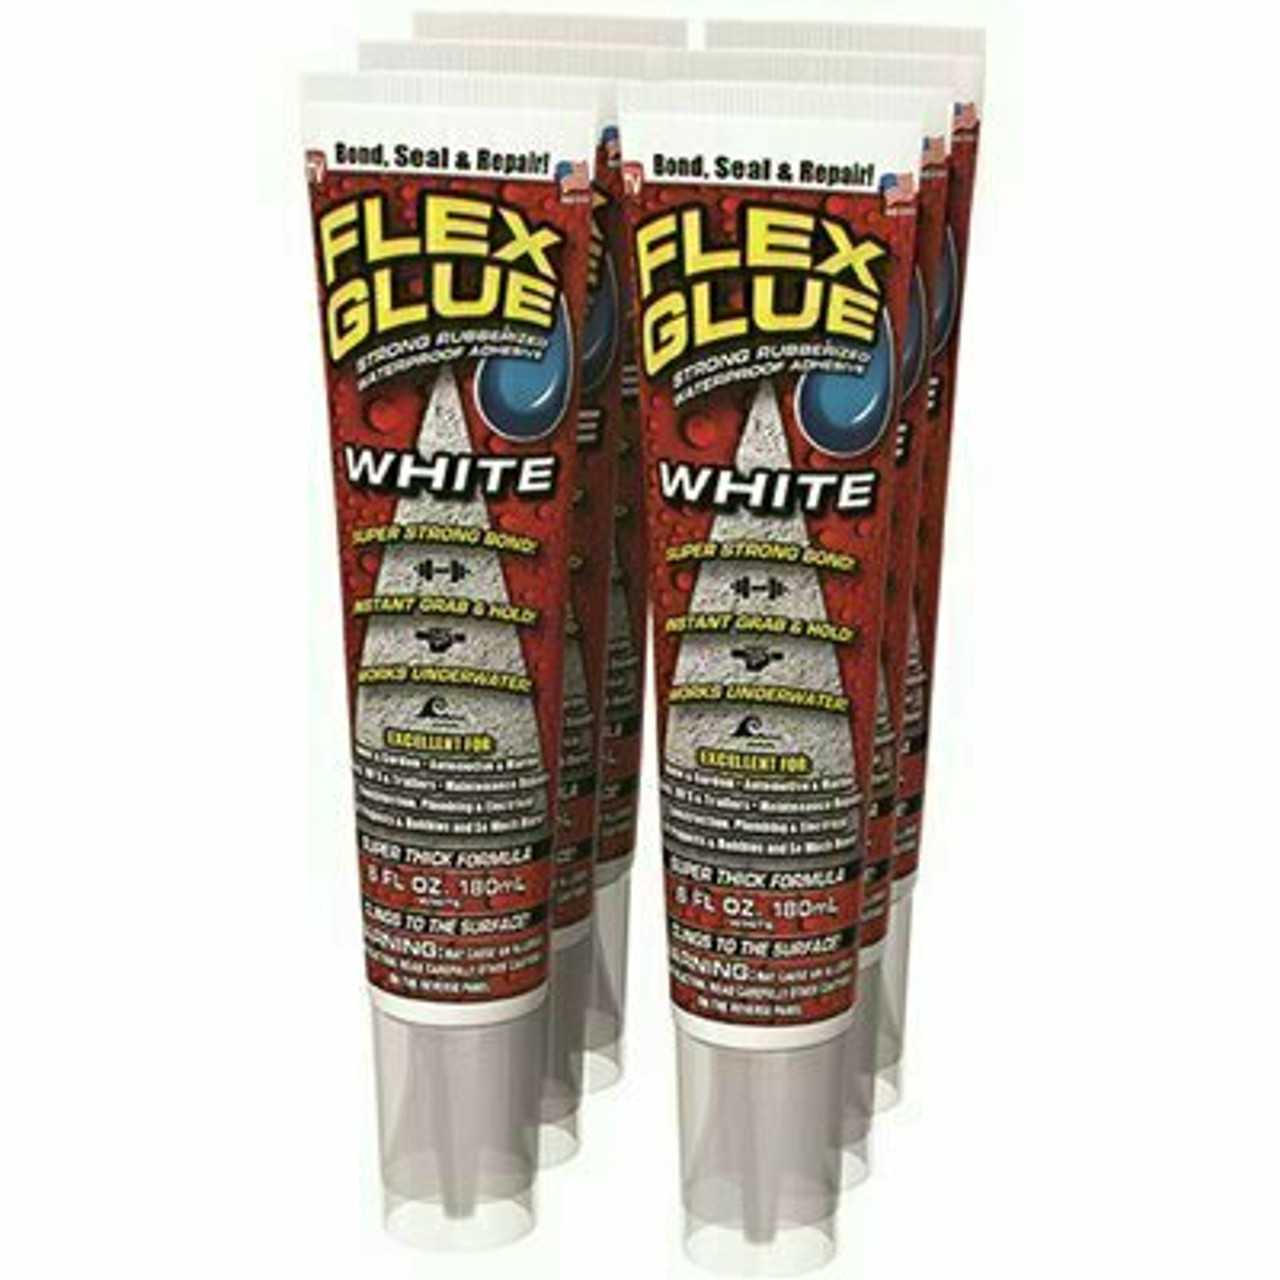 Flex Seal Family Of Products Flex Glue White 6 Oz. Strong Rubberized Waterproof Adhesive (6-Piece)